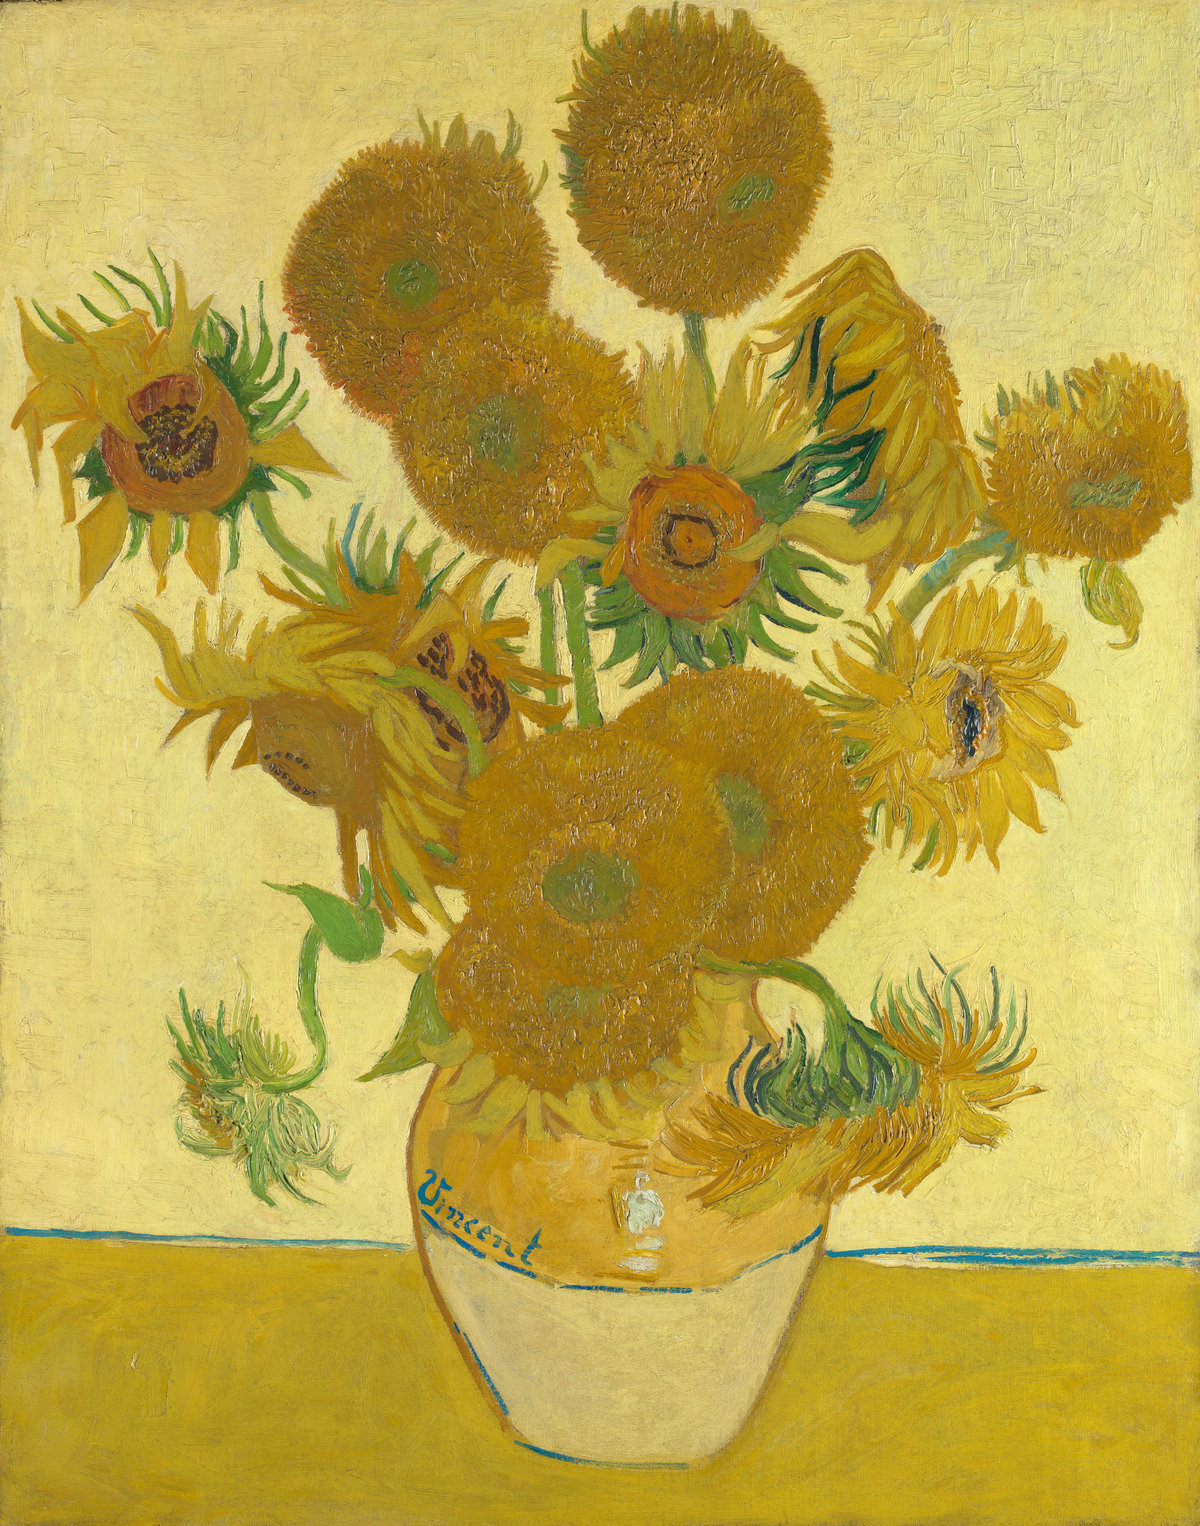 Vincent van Gogh, The Sunflowers, 1888, oil on canvas, 92.1 × 73 cm, The National Gallery, London Bought, Courtauld Fund, 1924. Photo: © The National Gallery, London